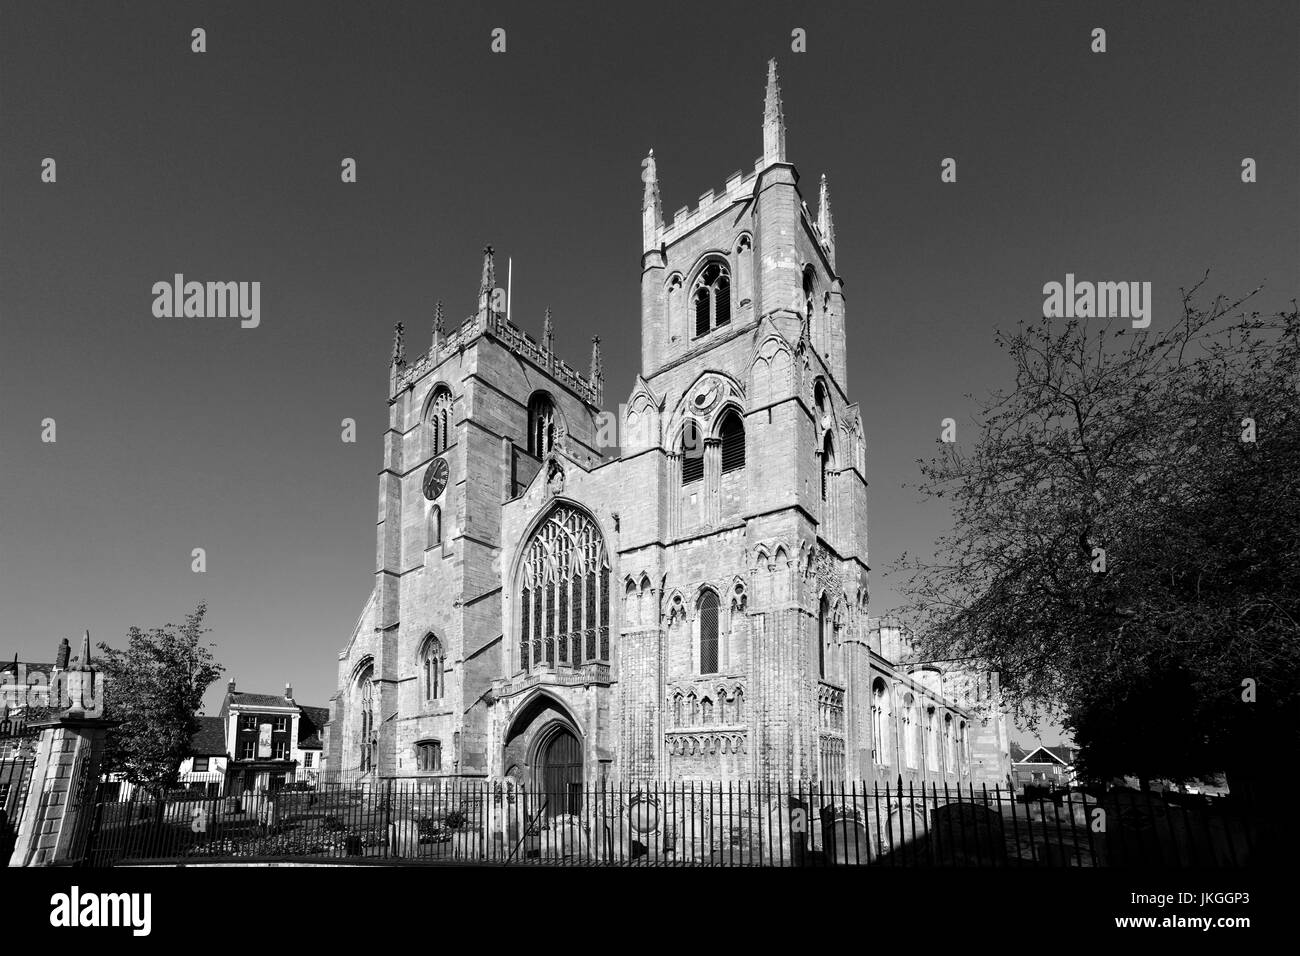 Exterior view of St Margarets Church, King's Lynn town, North Norfolk, England, Britain, UK Stock Photo